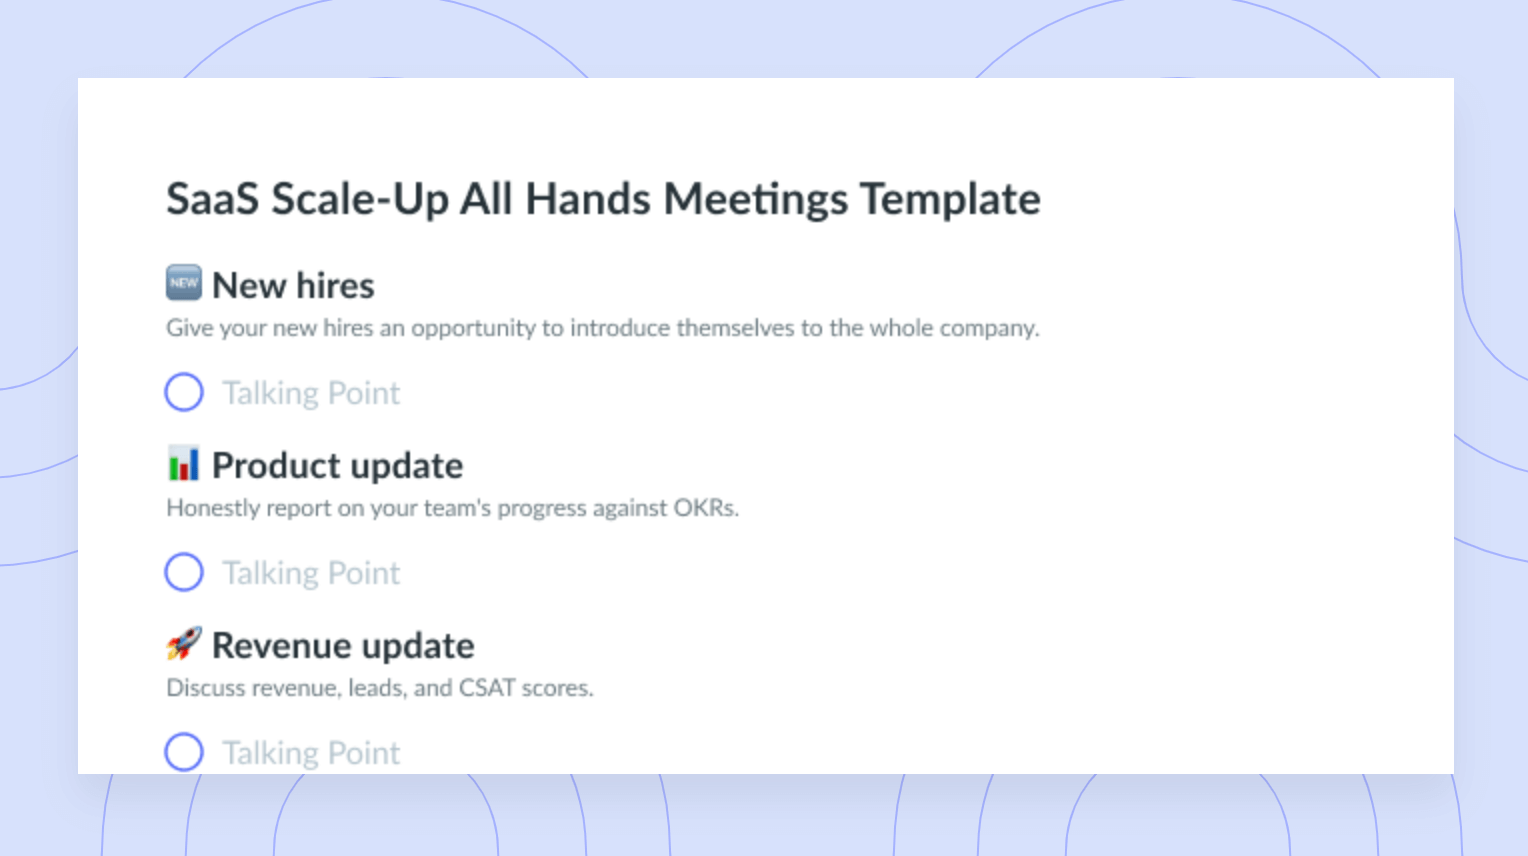 SaaS Scale-Up All Hands Meeting Template